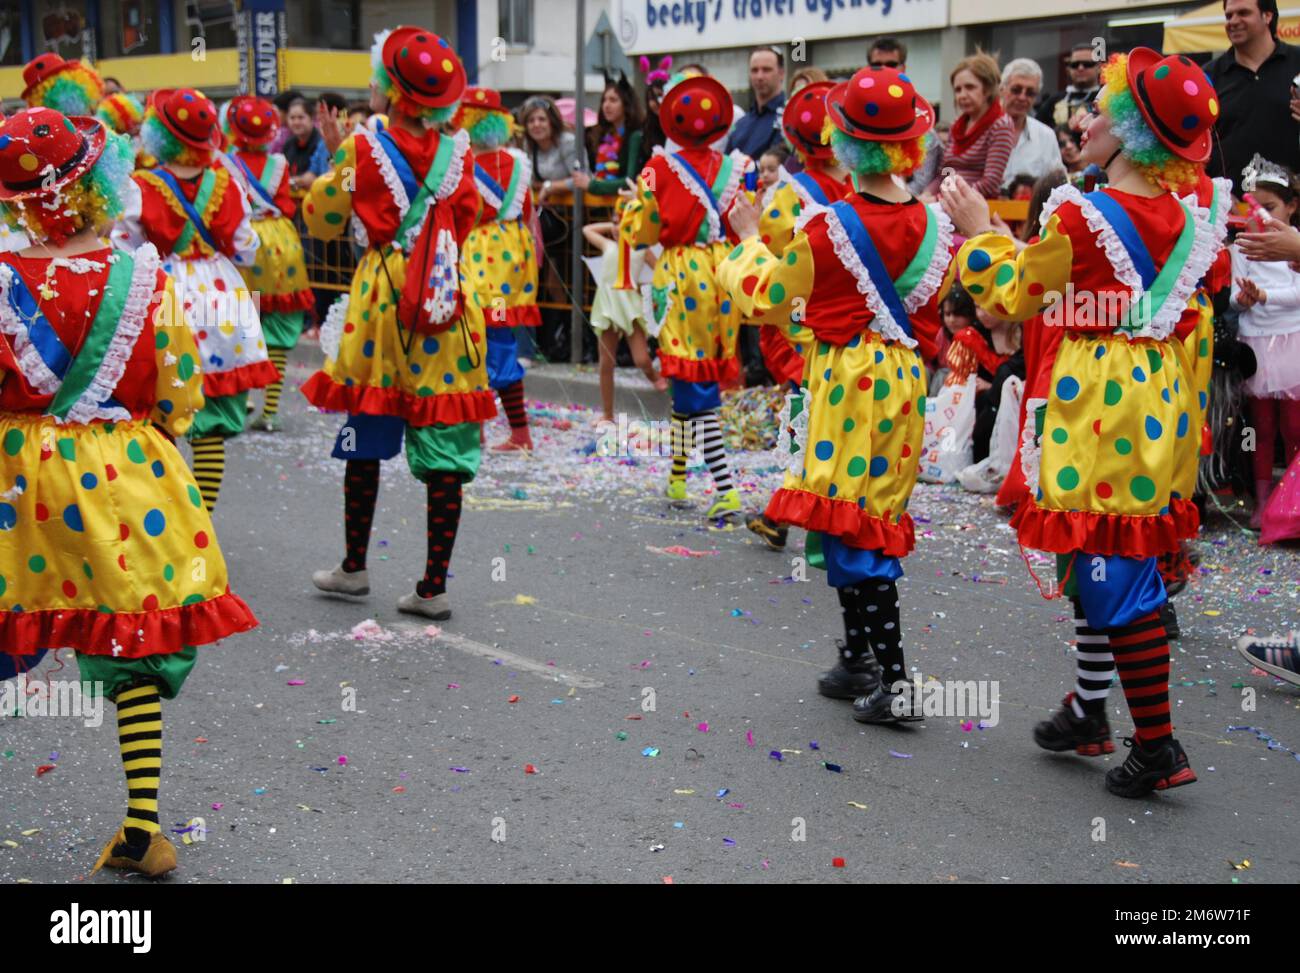 People with colorful costumes parading on carnival parade. Limassol Cyprus Stock Photo